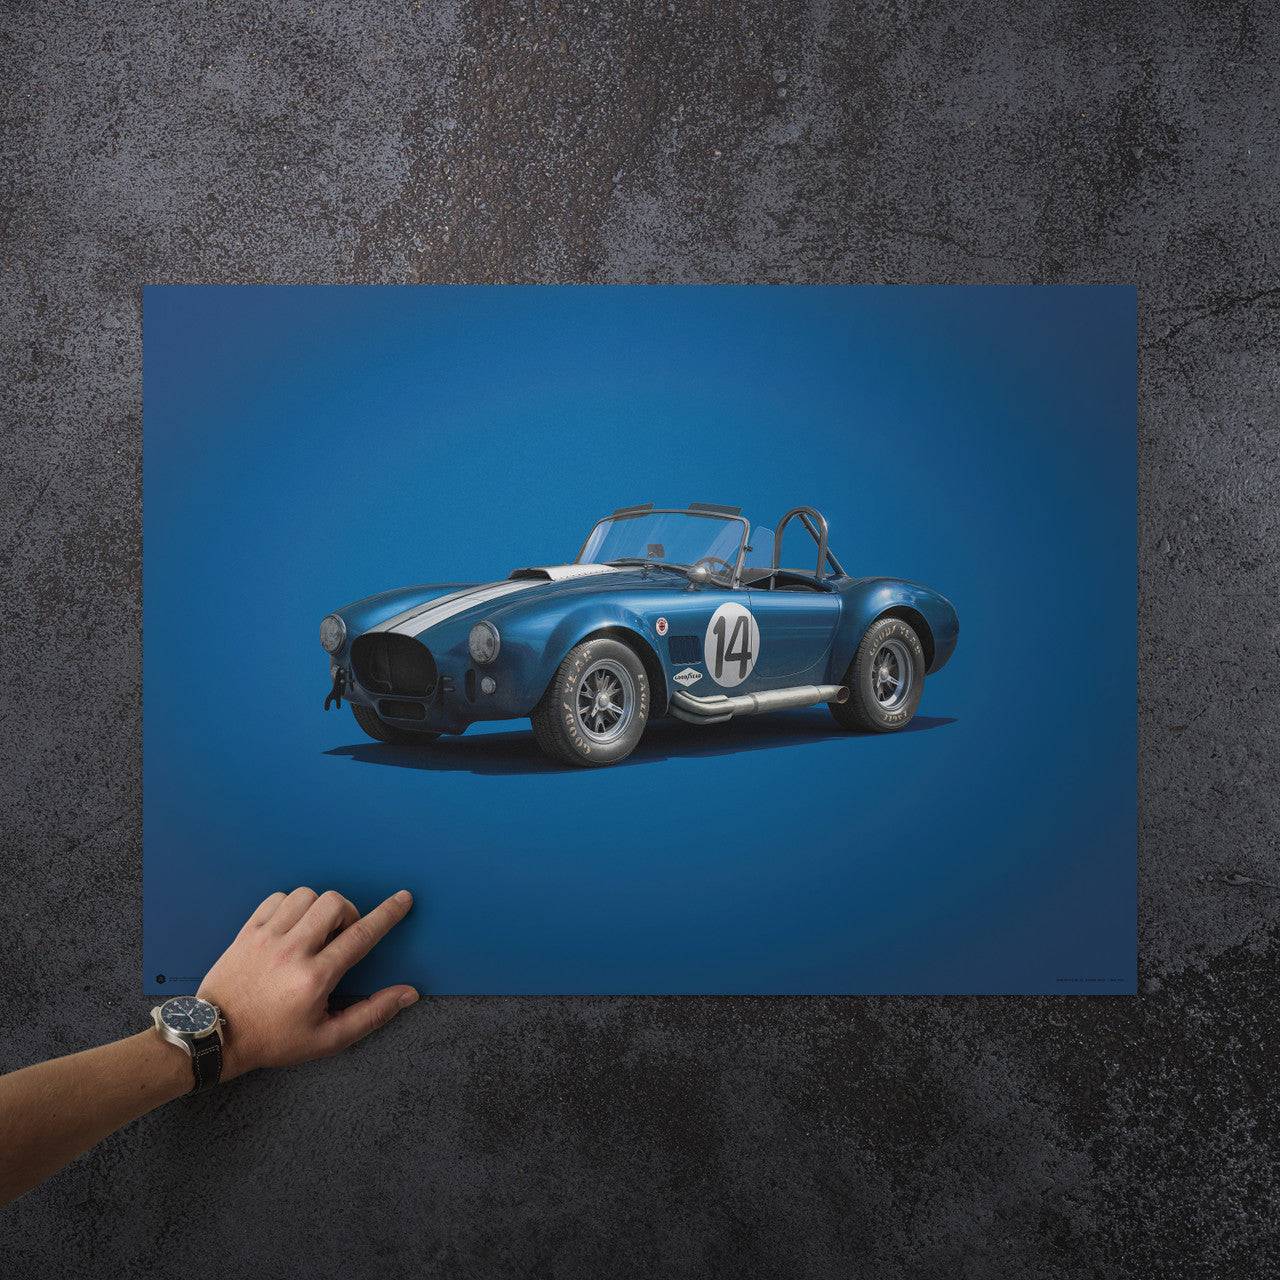 Shelby-Ford AC Cobra Mk III - Blue - 1965 - Colors of Speed Poster